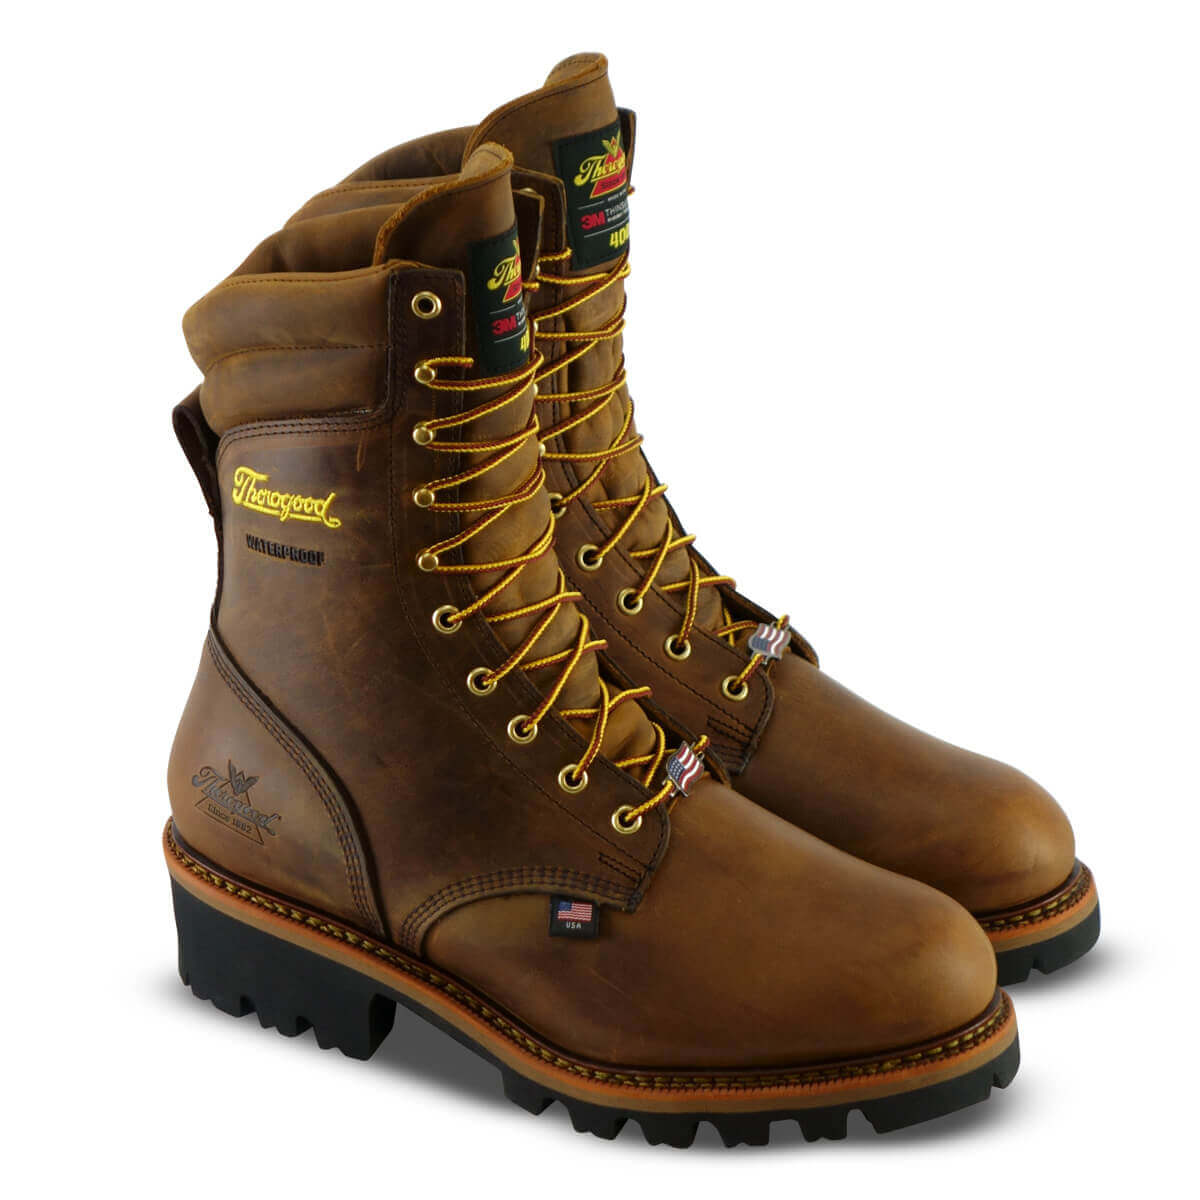 Buy > cork boots for logging > in stock